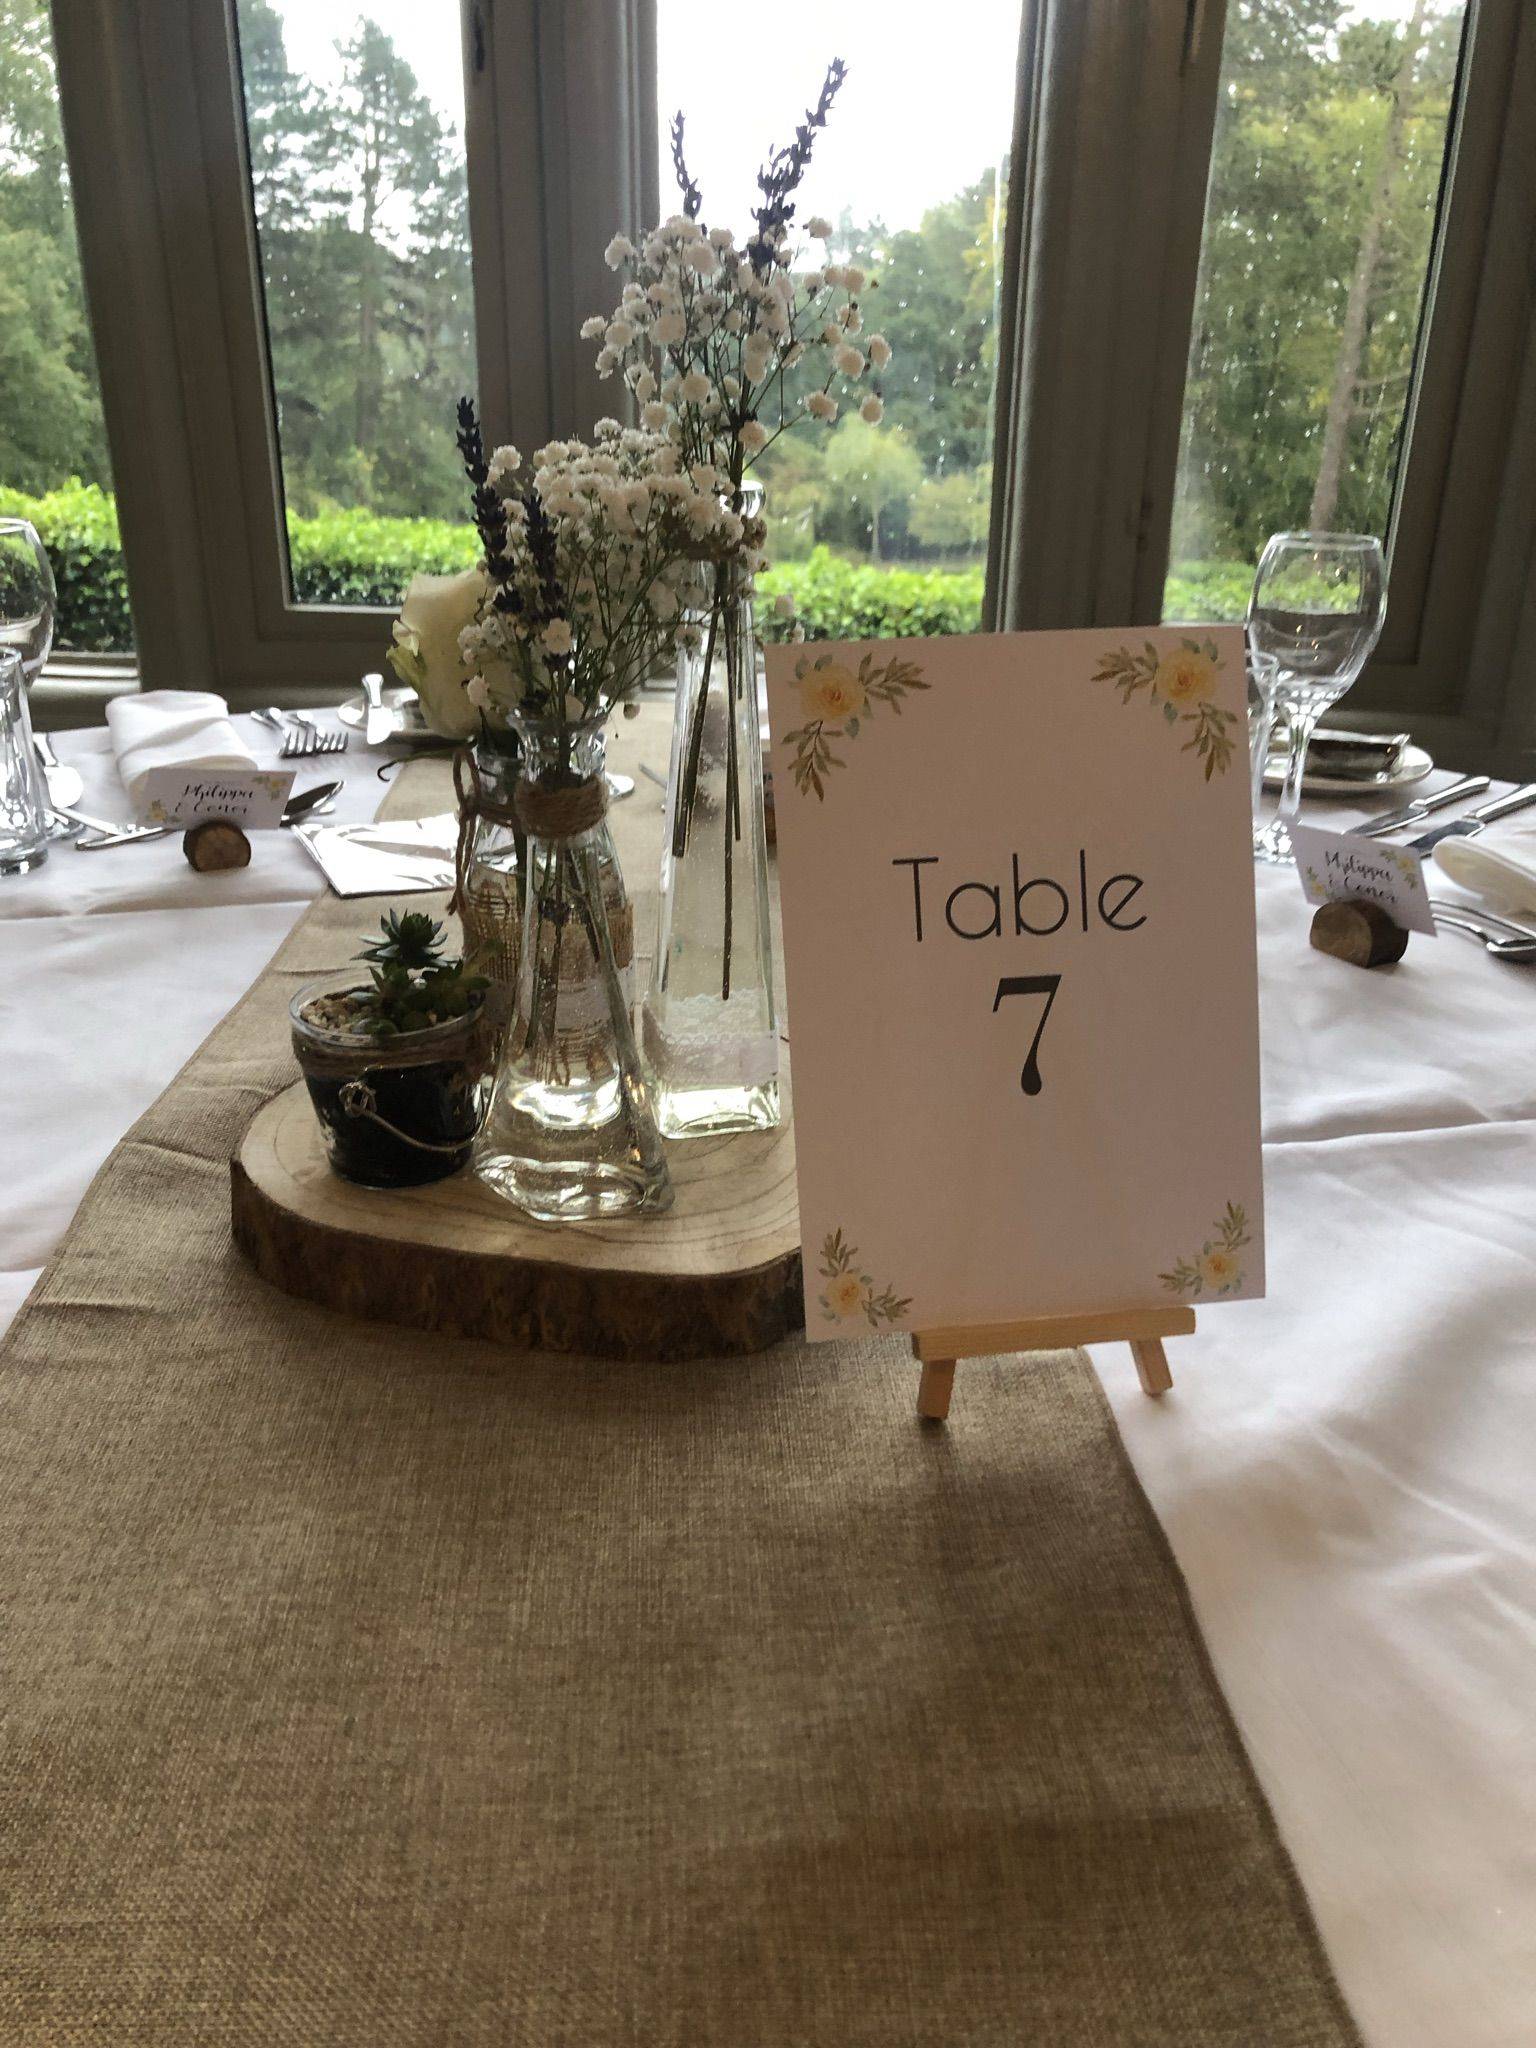 a table with a sign that says table 7.